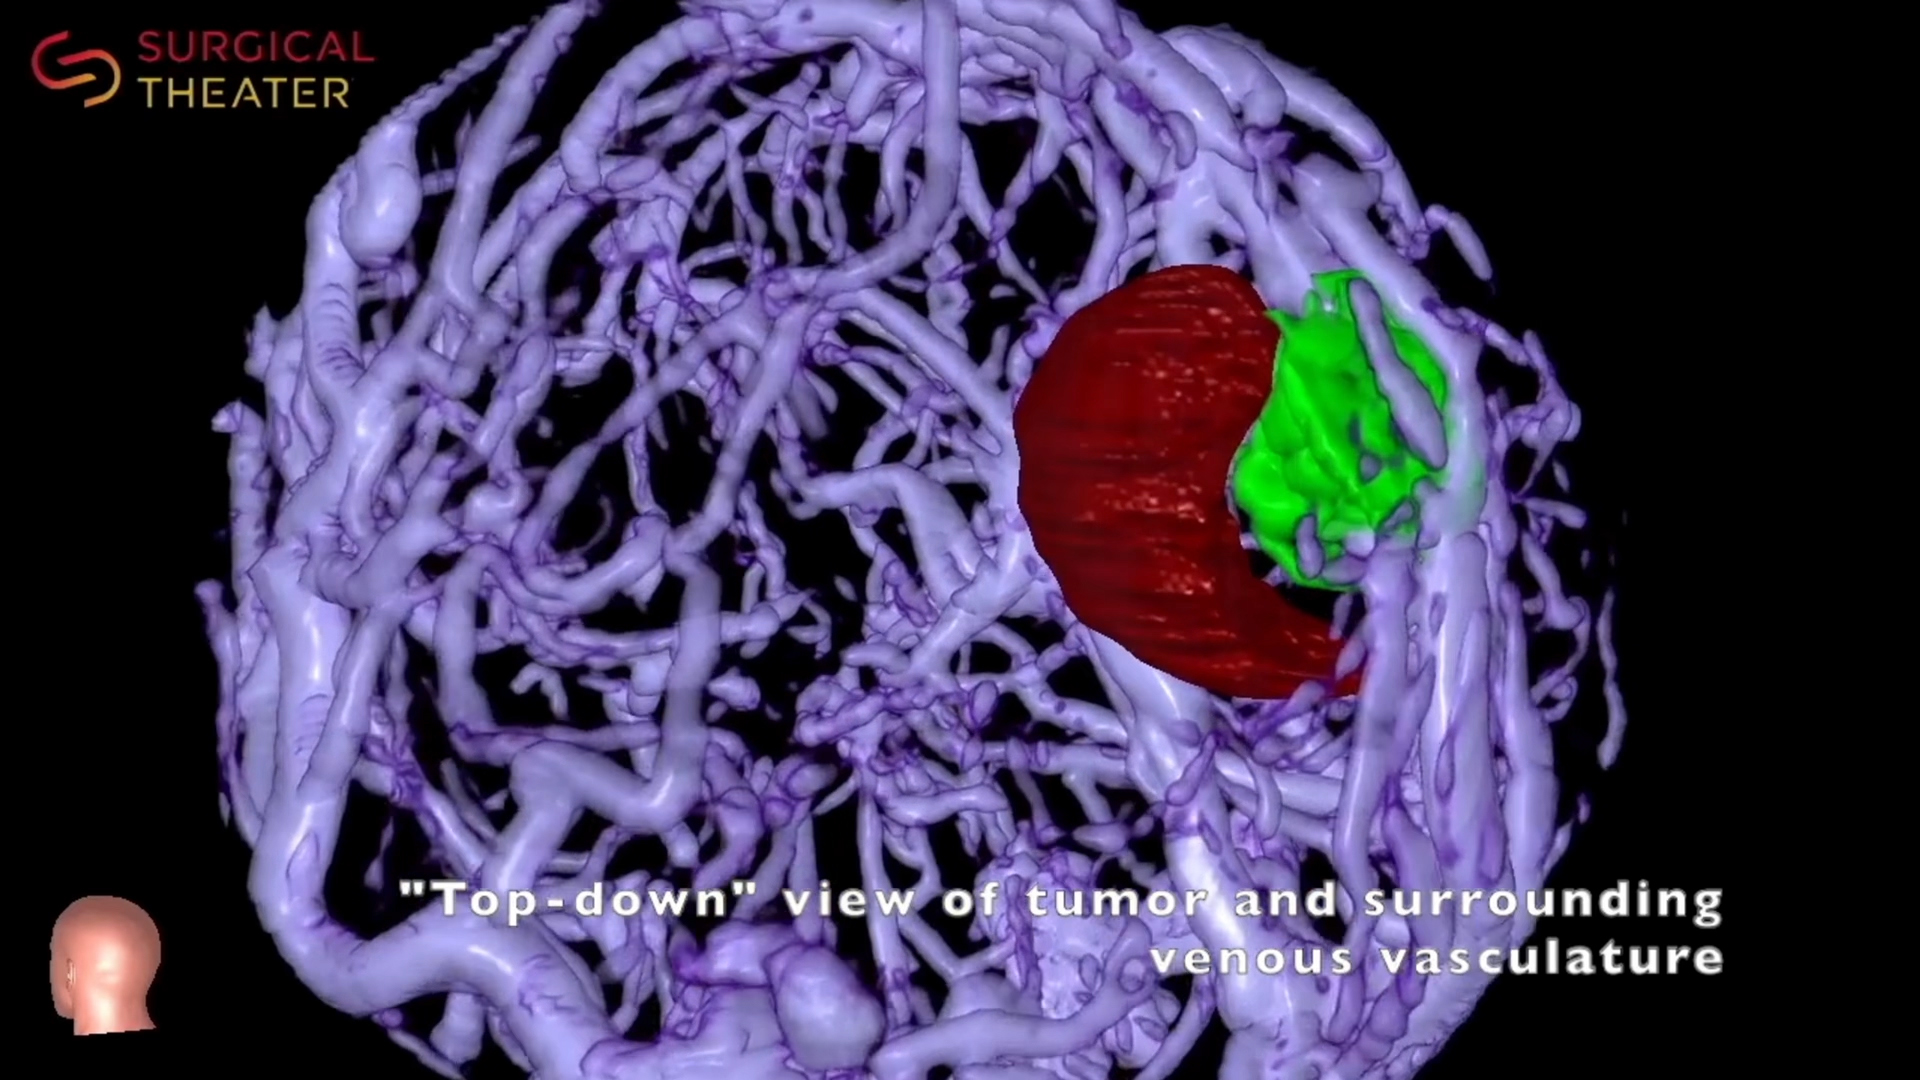 Animation showing a 3D visualization of a tumor